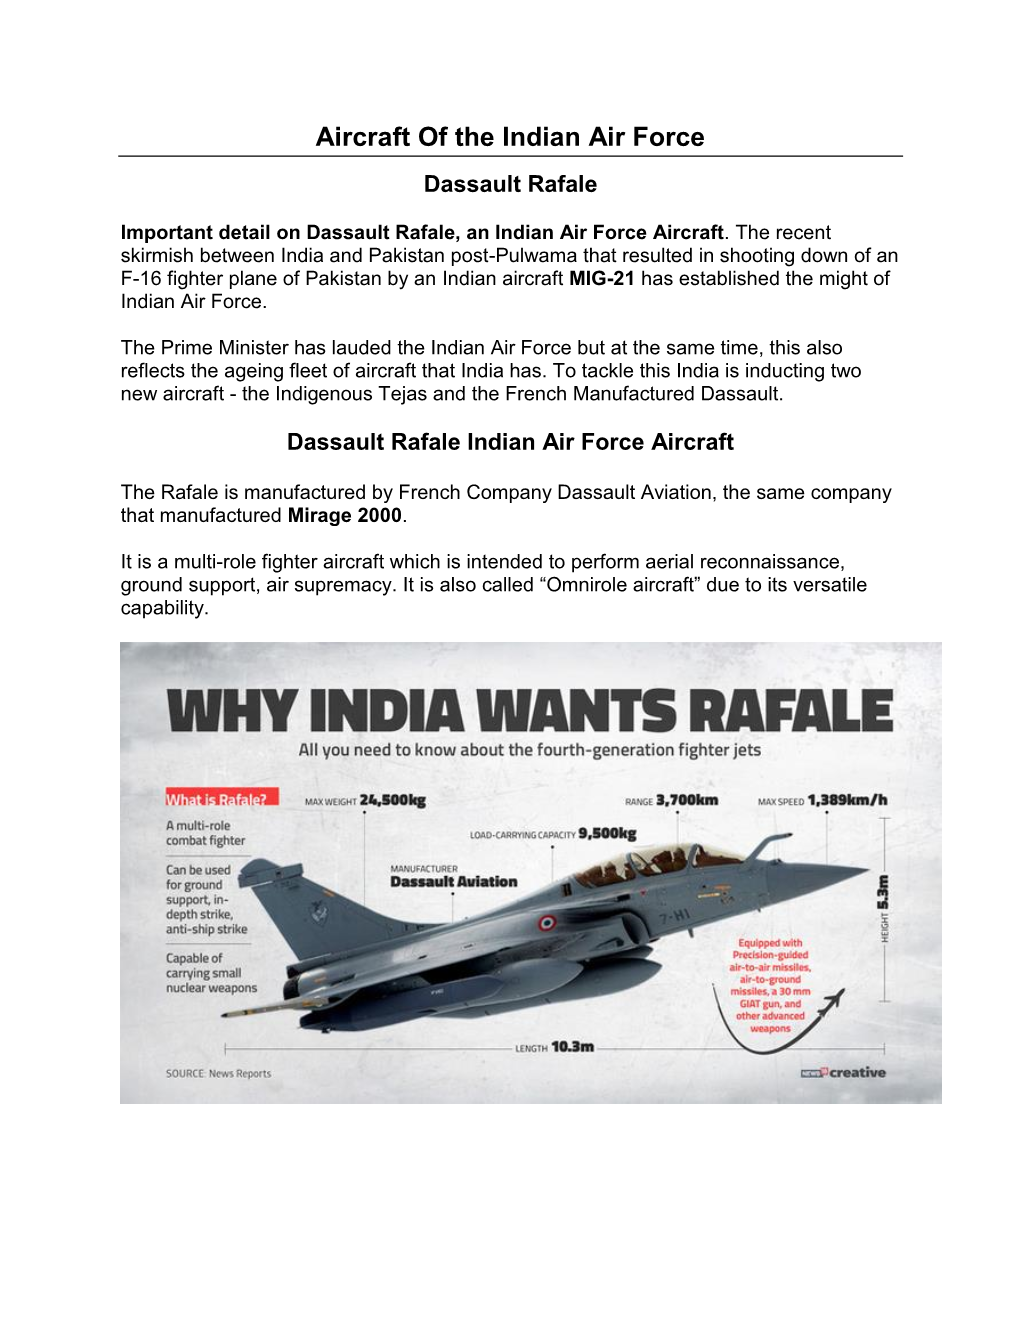 Aircraft of the Indian Air Force Dassault Rafale